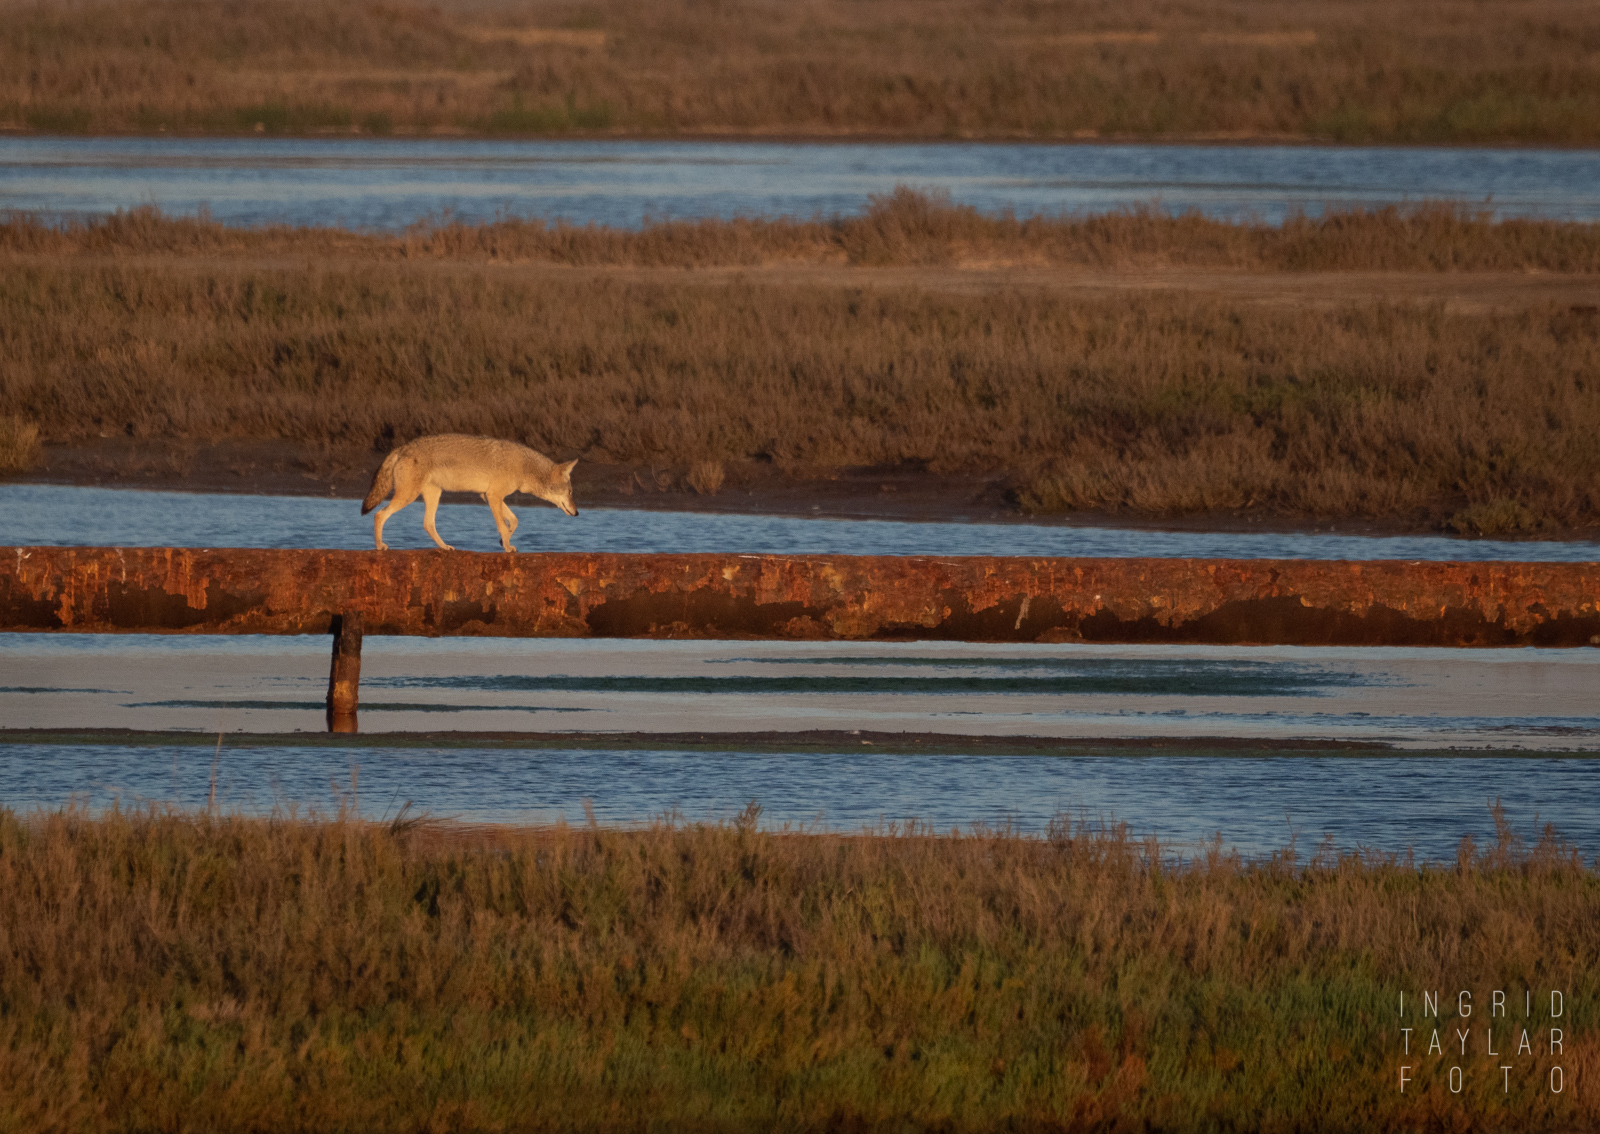 Coyote on pipeline at Bolsa Chica Ecological Reserve